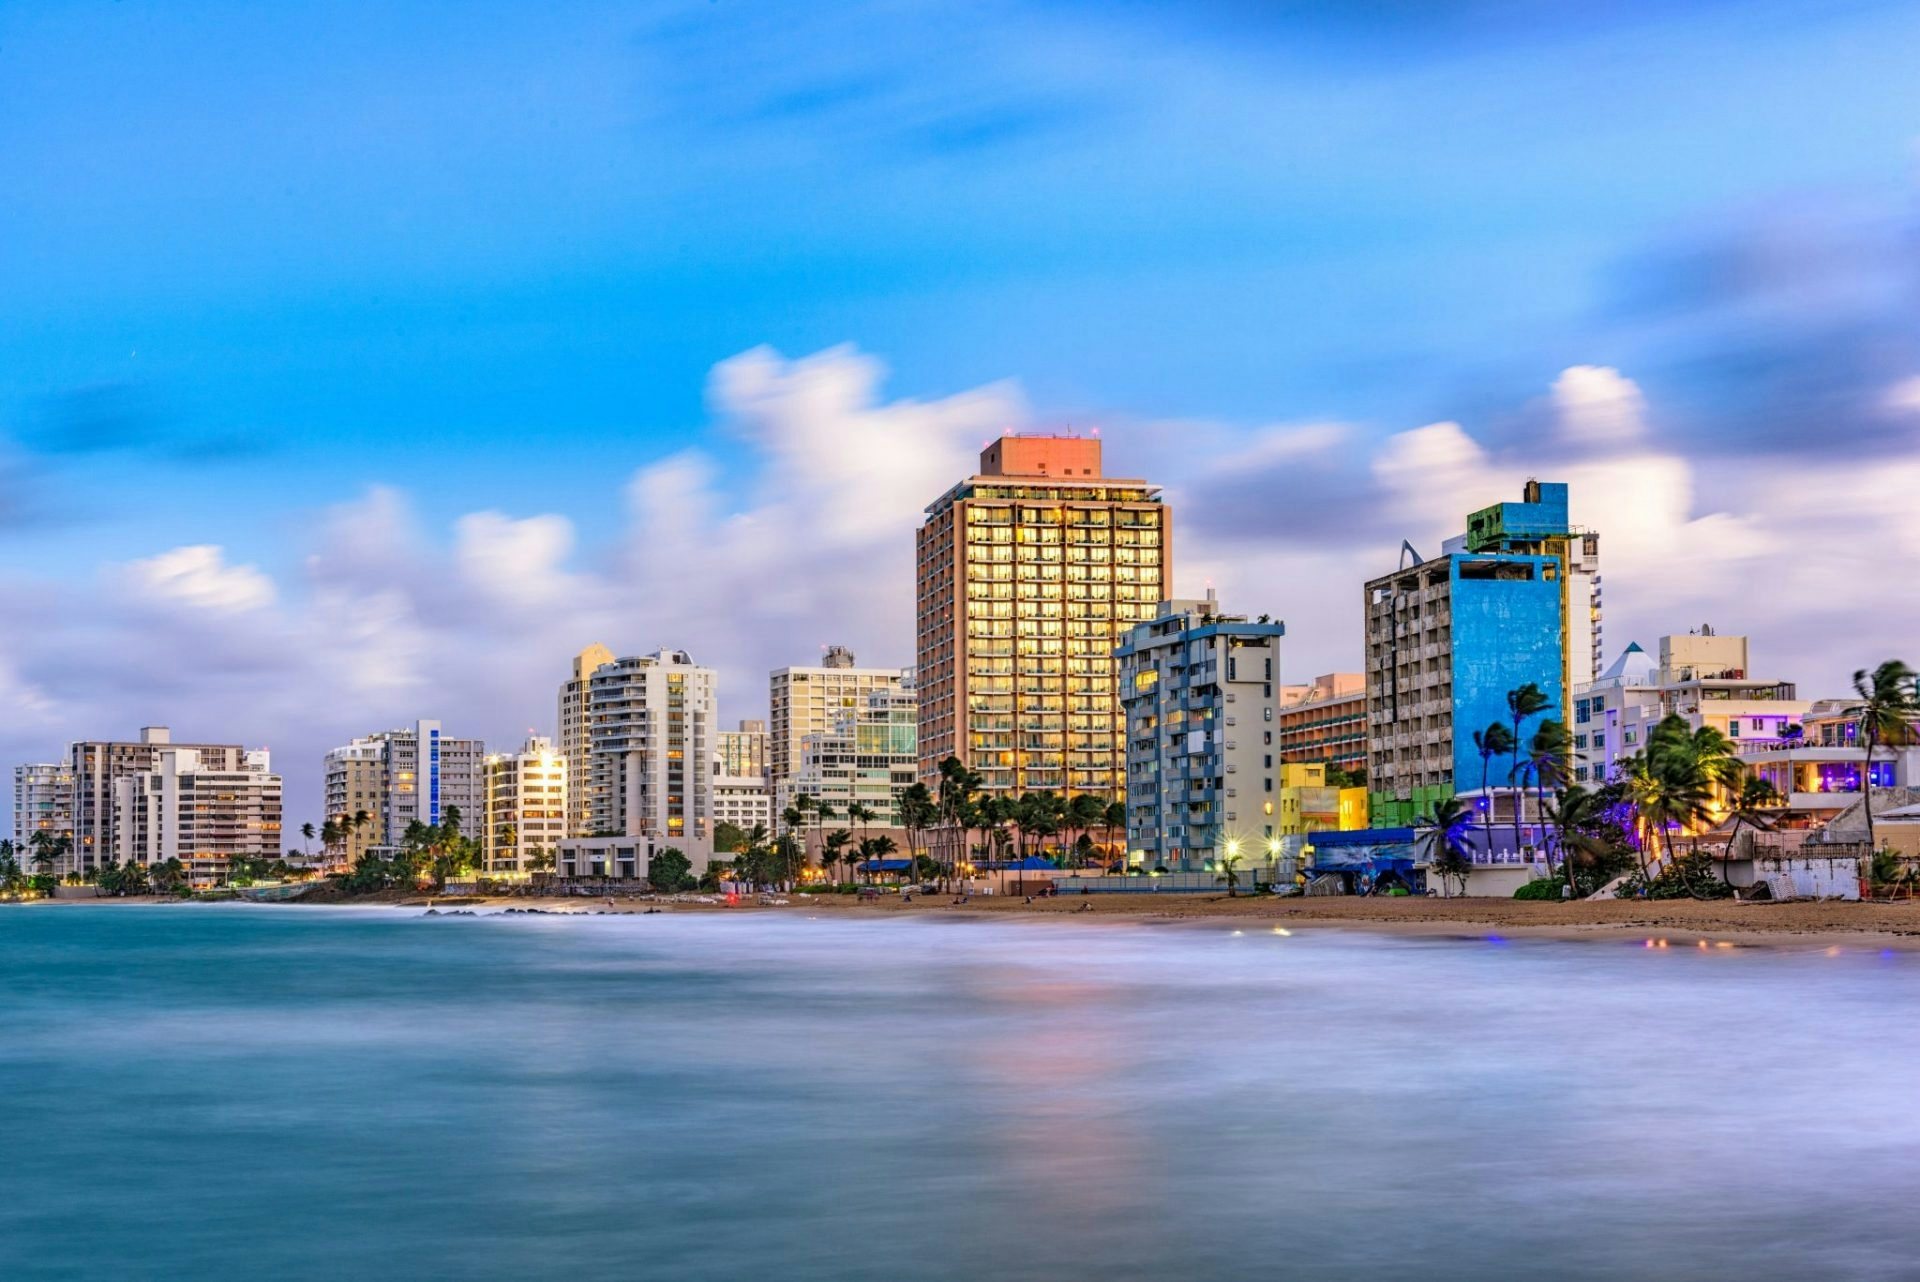 San Juan Skyline from Condado Beach. Puerto Rico hopes that a new China themed park will attract more Chinese visitors help ease its financial woes. Photo: Sean Pavone/Shutterstock